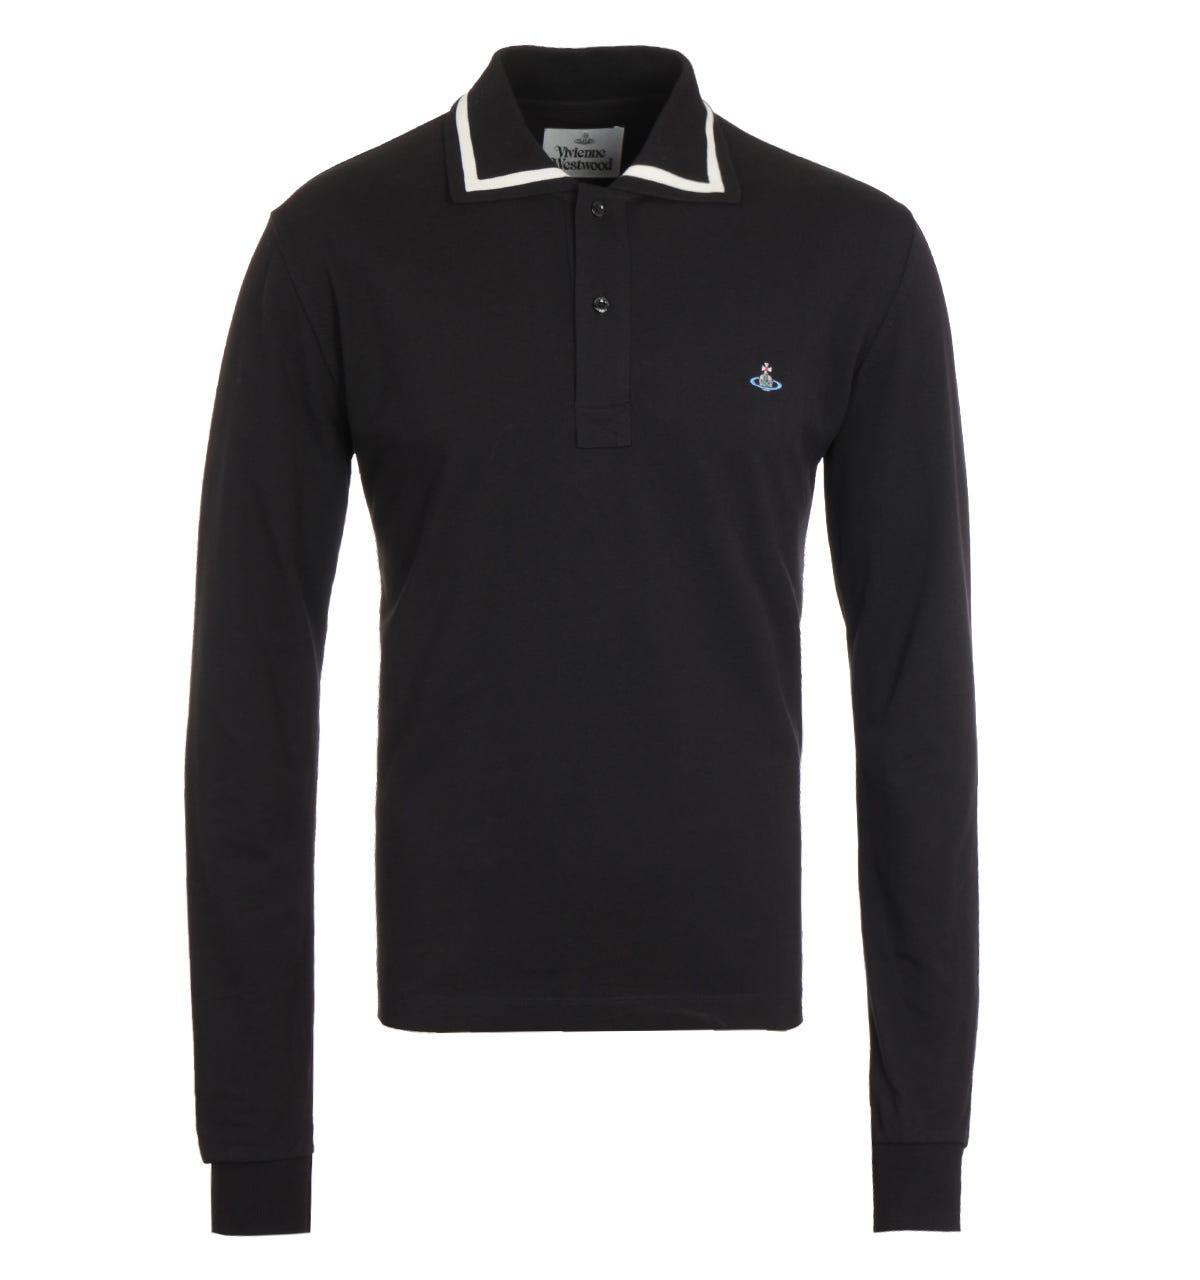 Vivienne Westwood Cotton Tipped Long Sleeve Black Polo Shirt for Men - Lyst